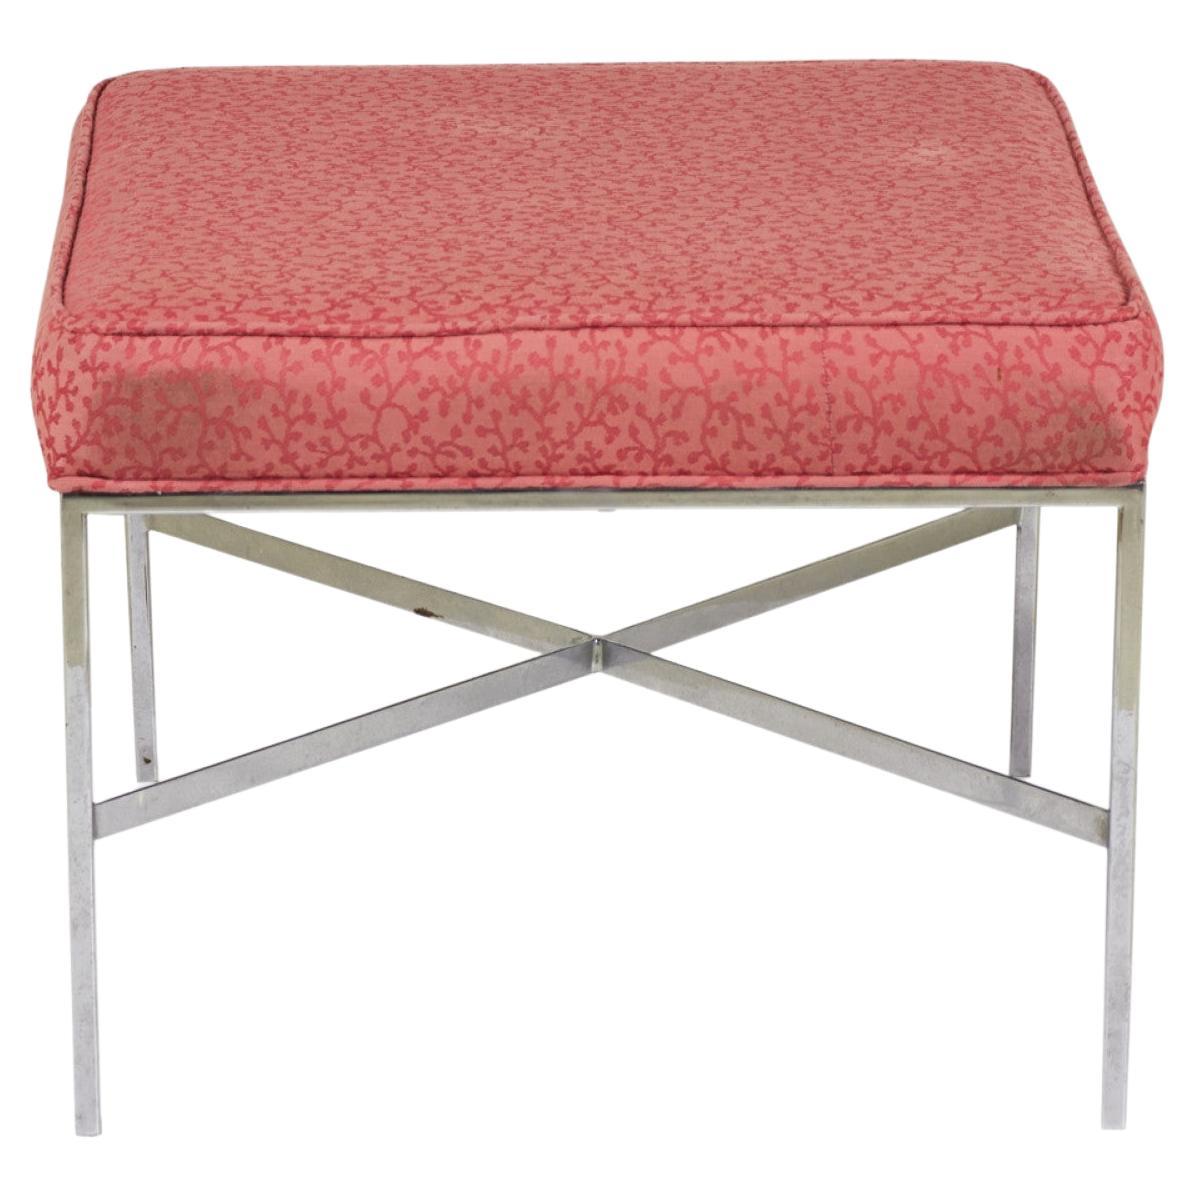 Design Institute of Chrome and Raspberry Upholstery Square Bench For Sale